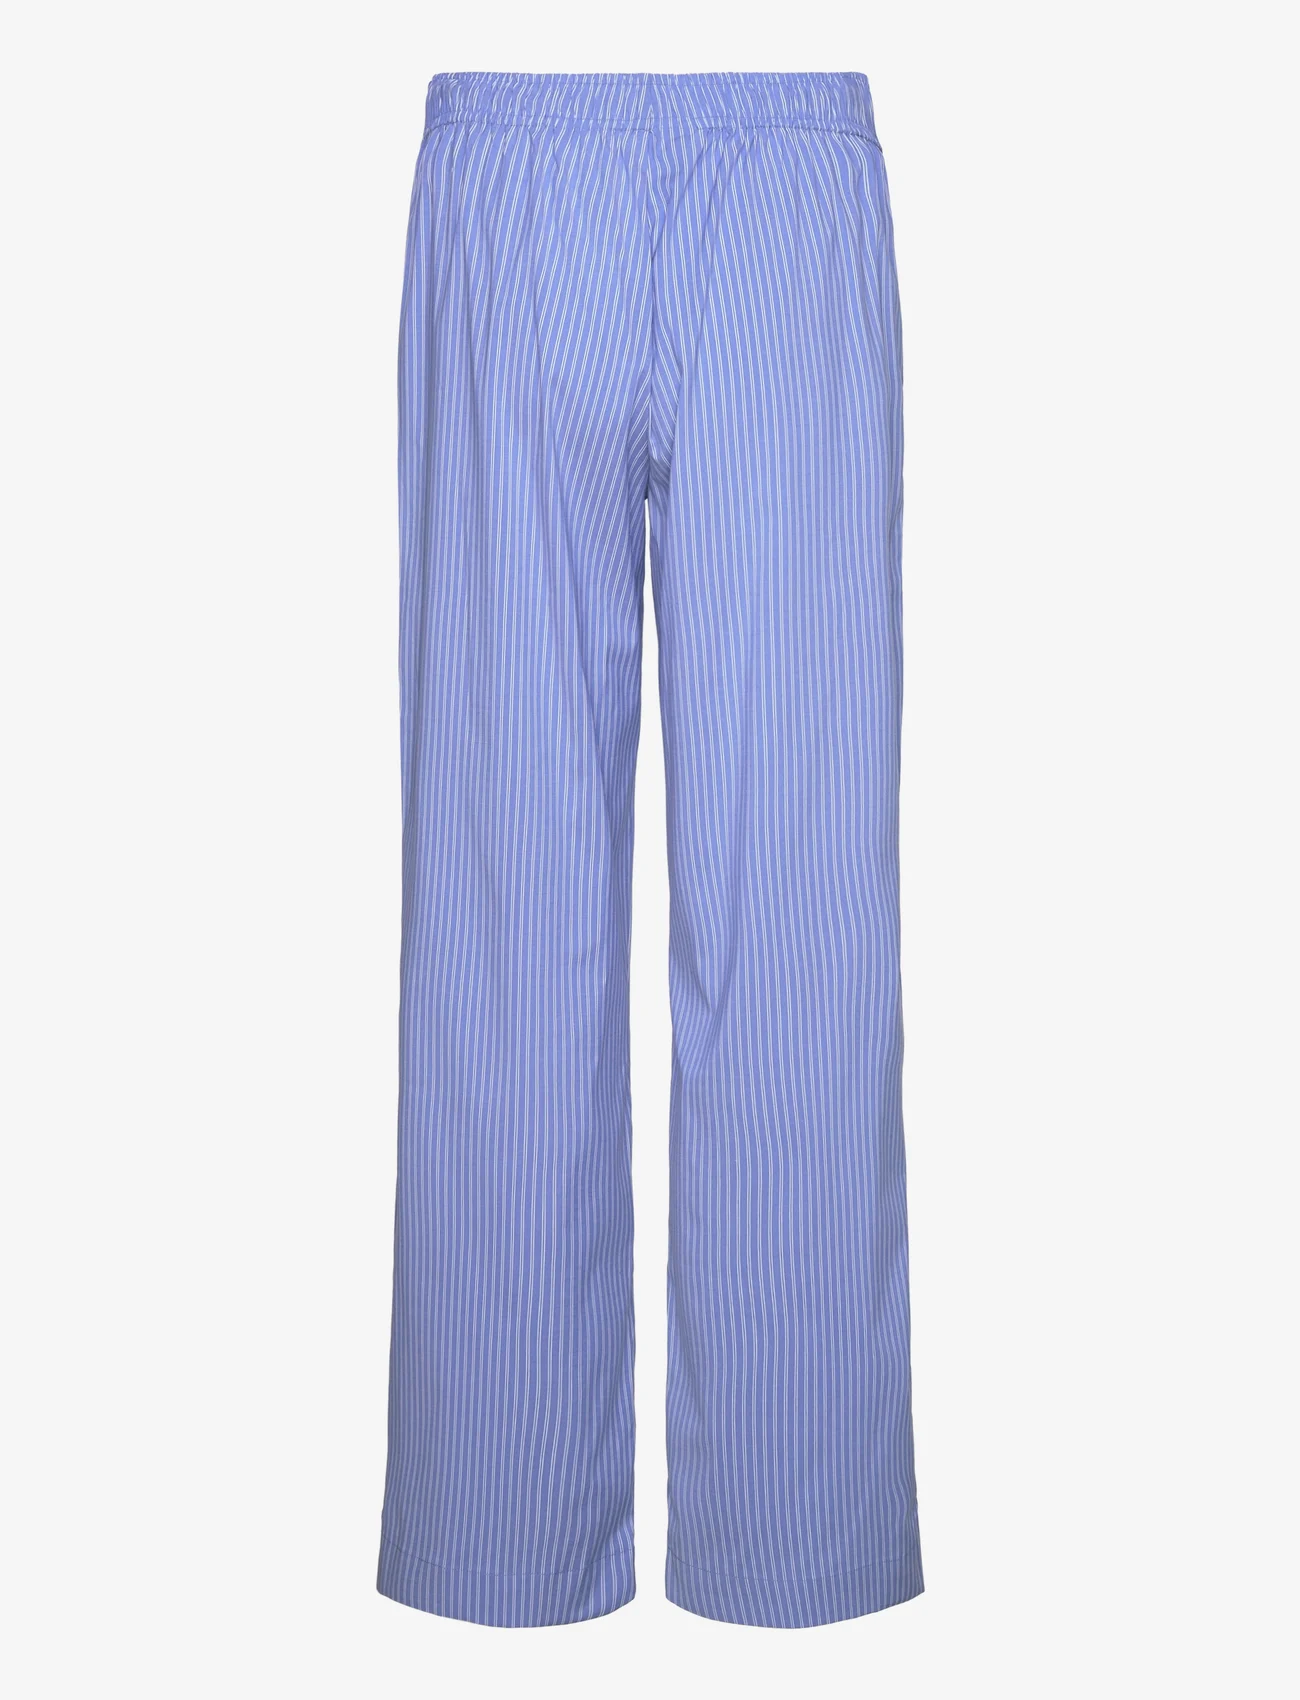 Sofie Schnoor - Trousers - blue striped - 1